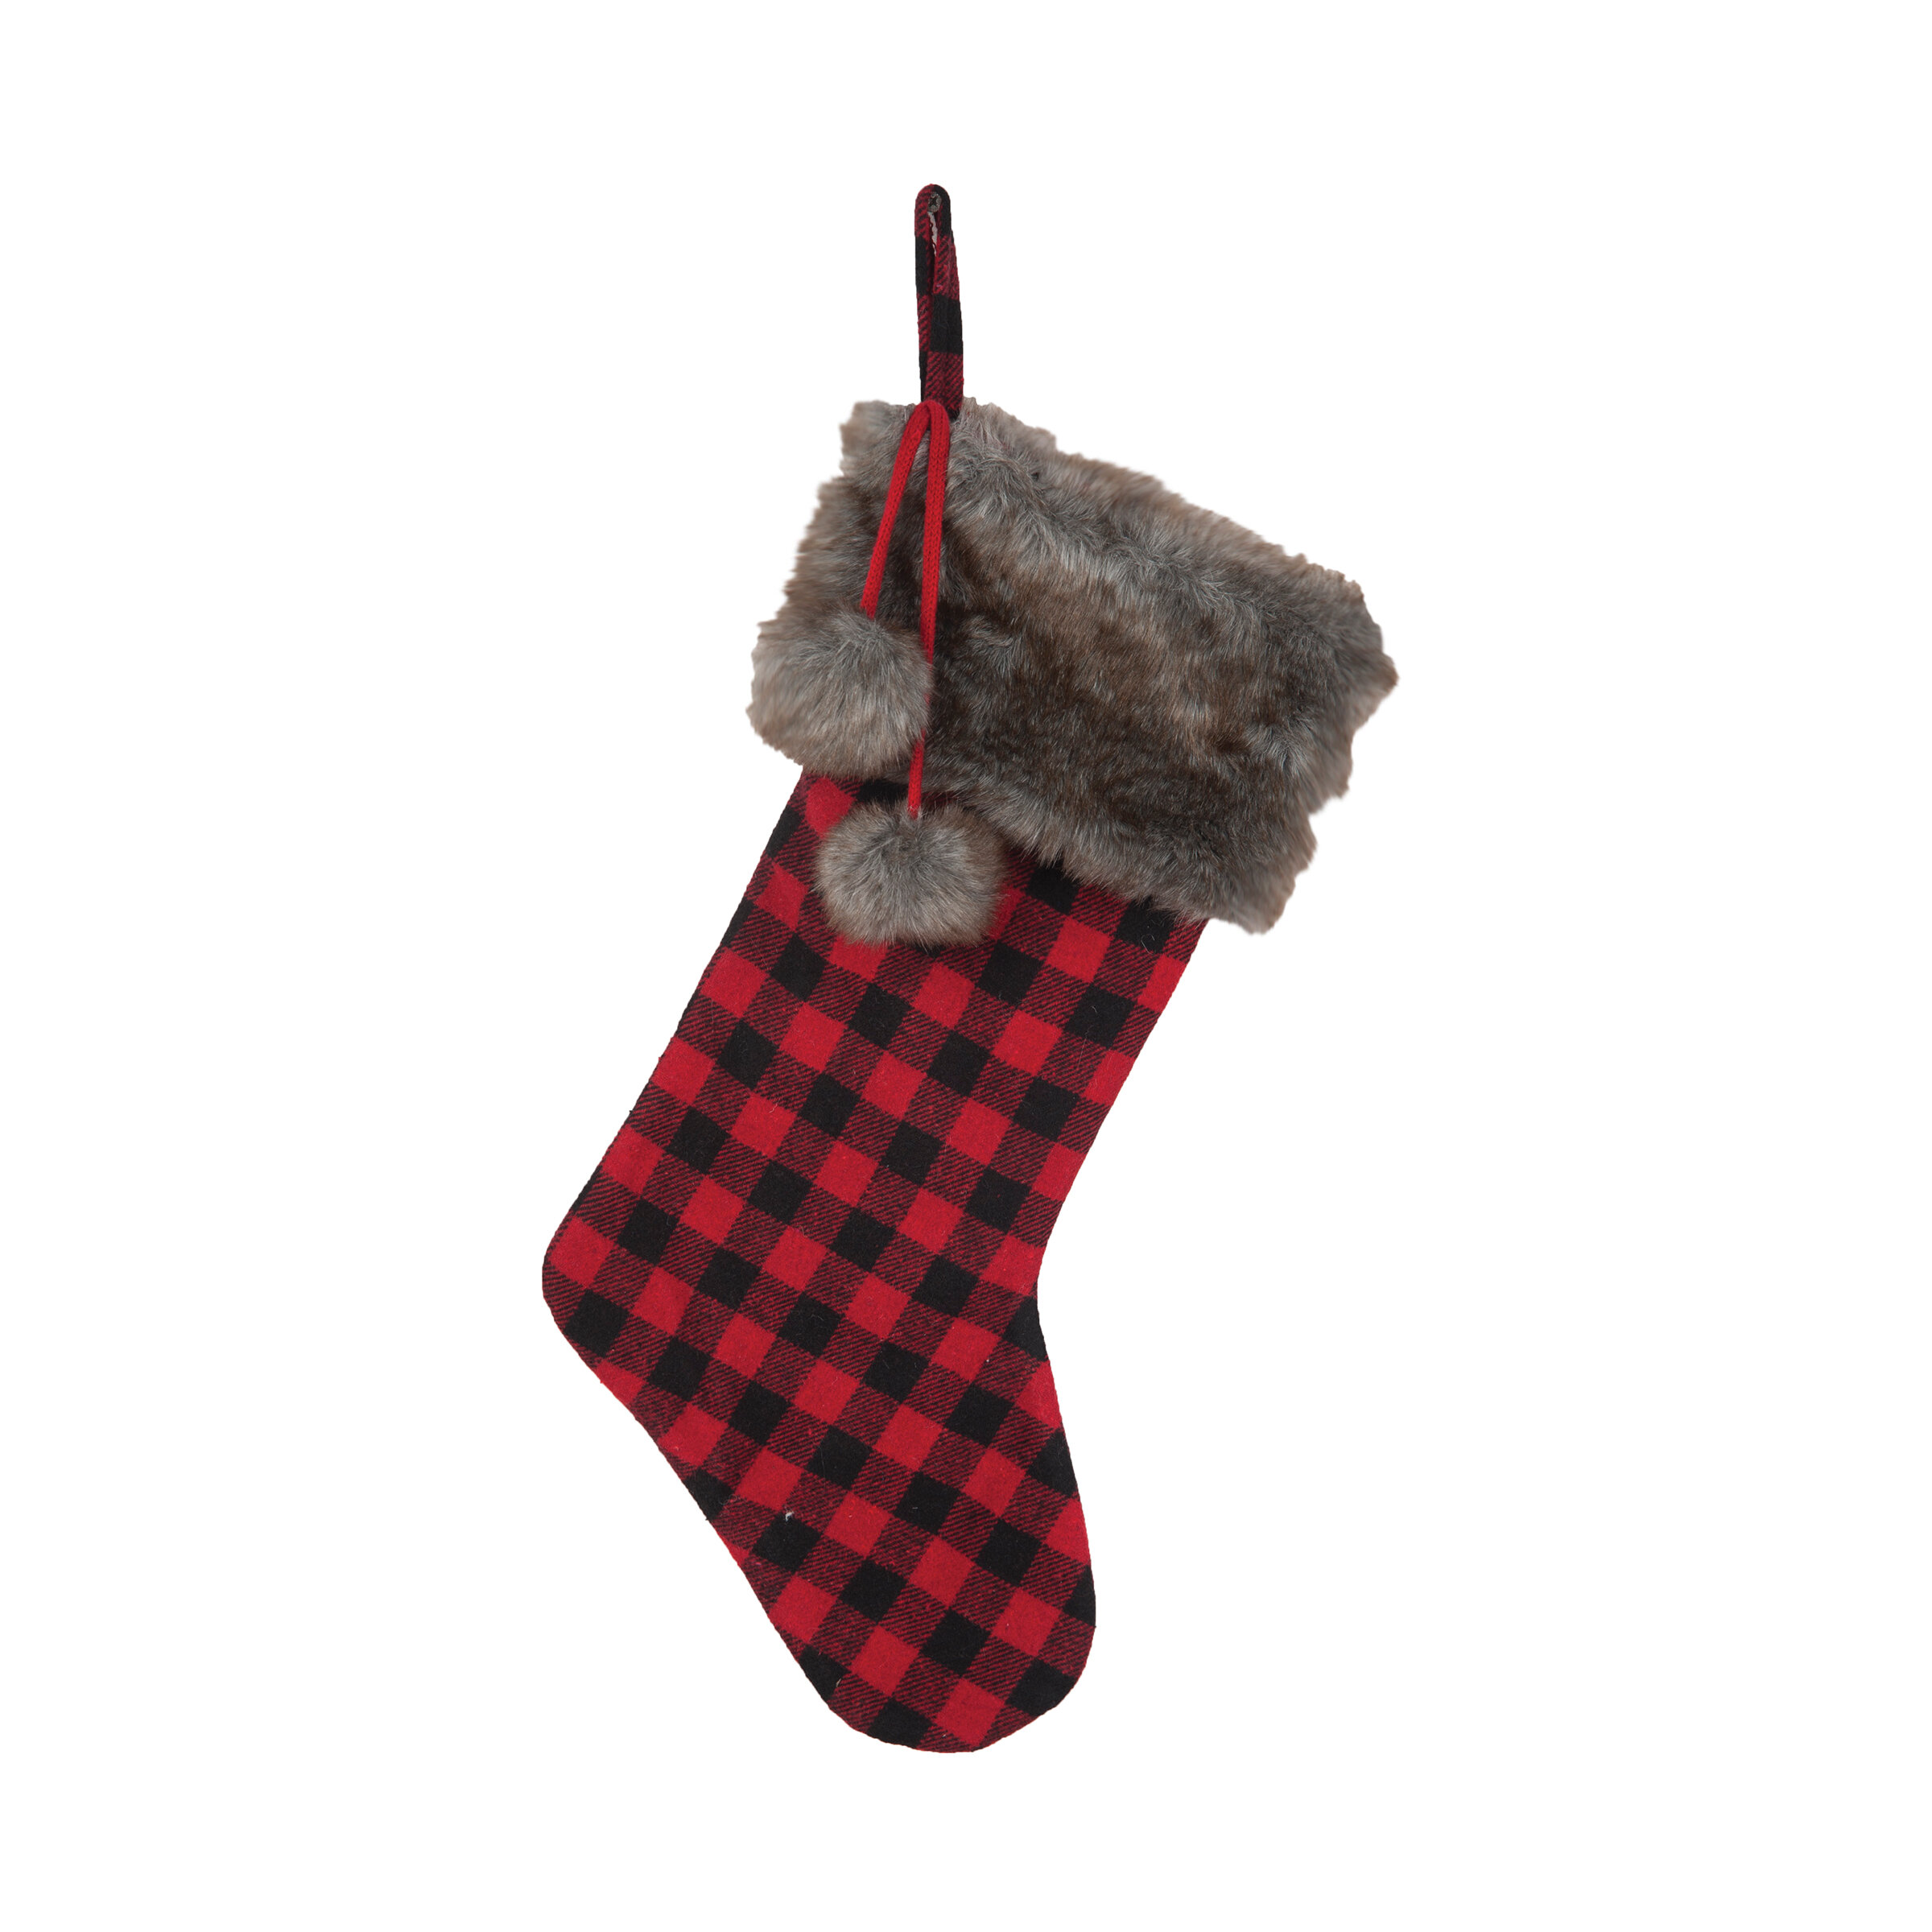 Rustic Buffalo Plaid Monogrammed "M" Christmas Stocking Primitive Country NEW 